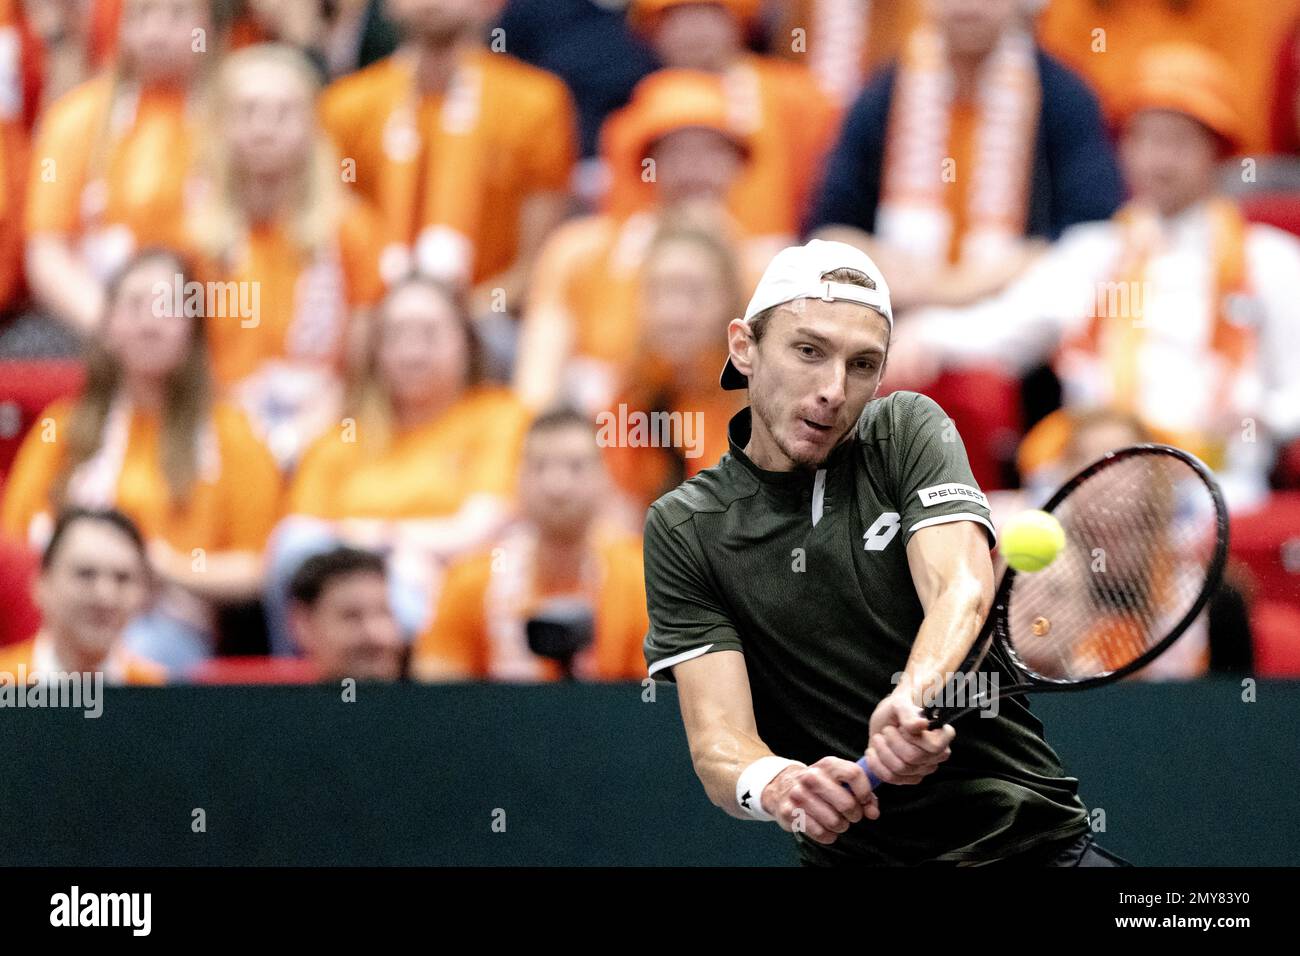 GRONINGEN - Lukas Klein (Slovakia) in action against Tallon Grepe  (Netherlands) during the qualification round for the Davis Cup Finals. The  winner will qualify for the group stage of the Davis Cup